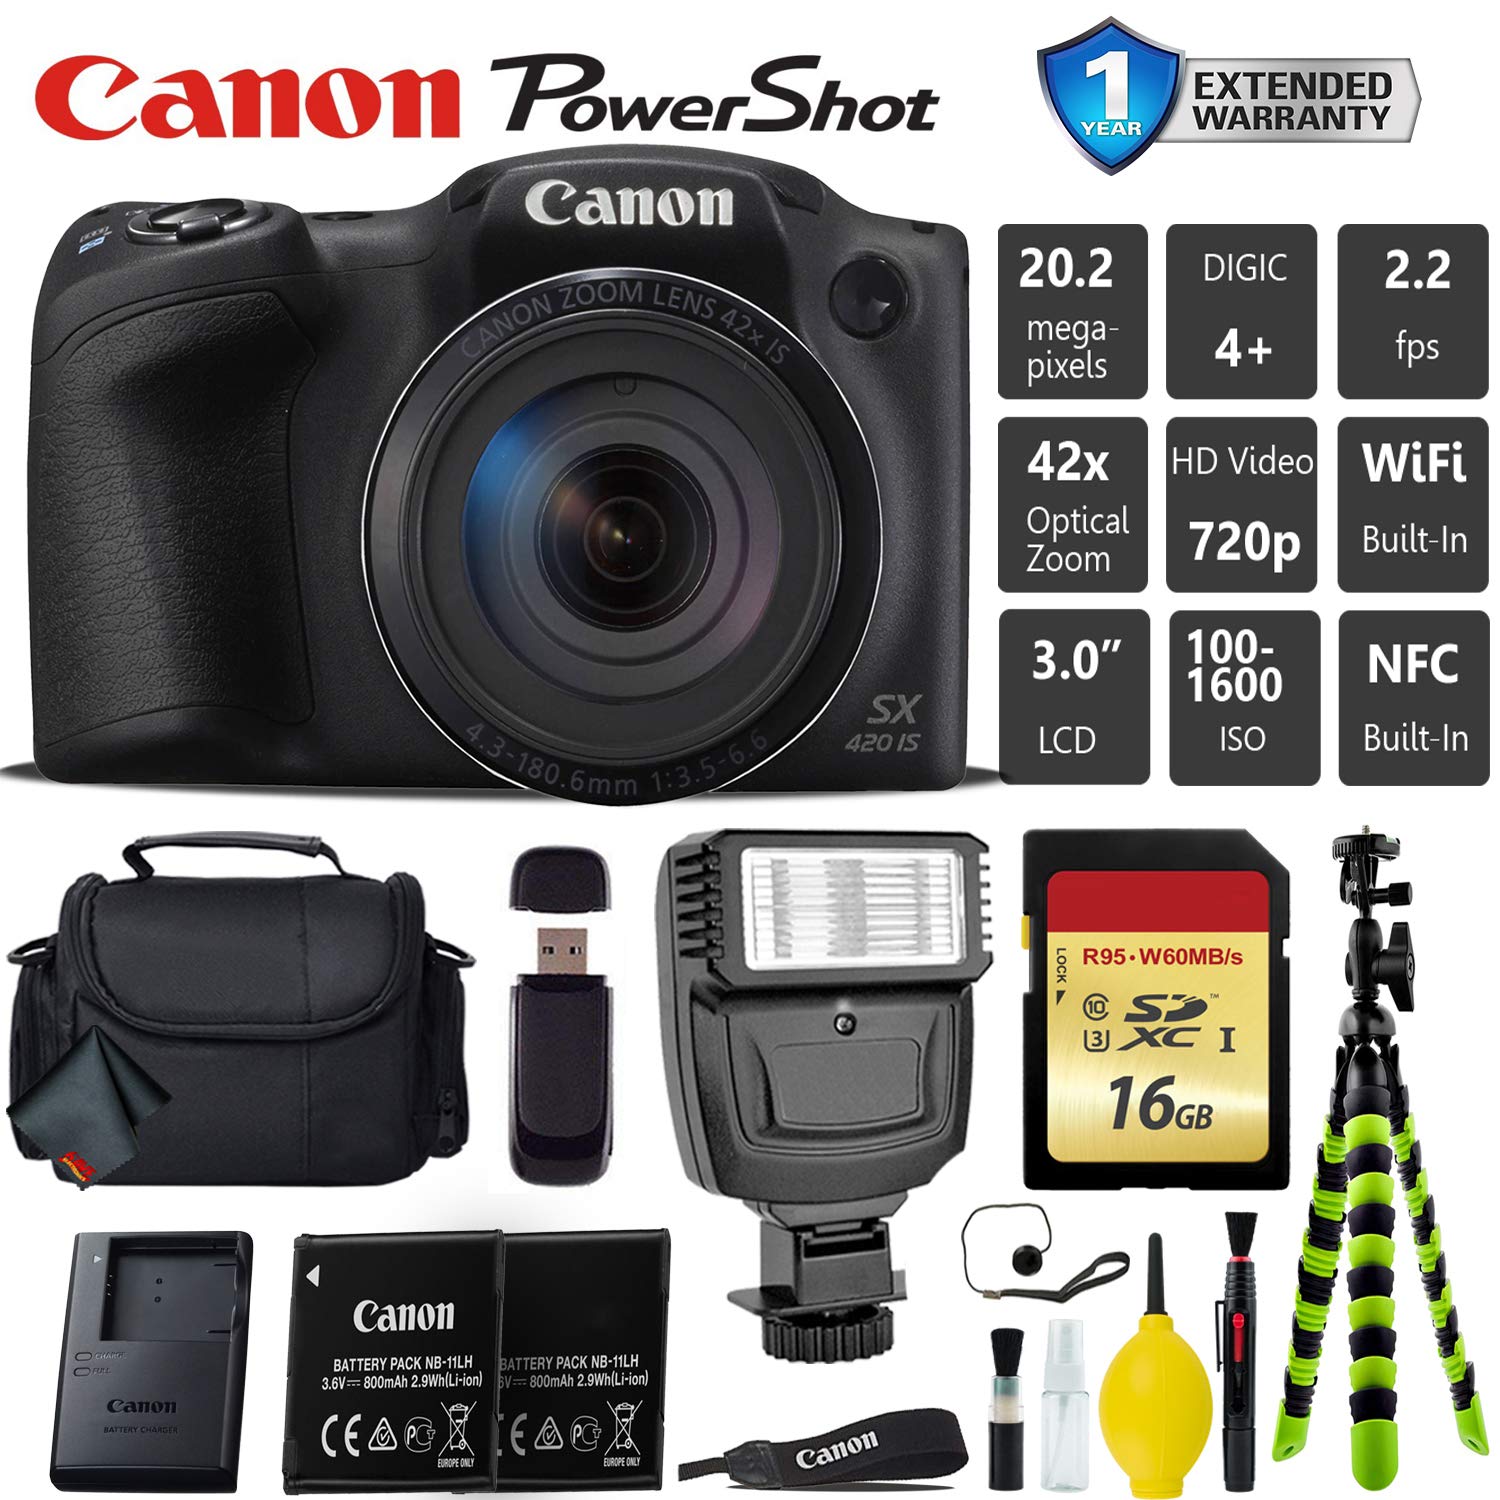 Canon PowerShot SX420 IS Digital Point and Shoot 20MP Camera + Extra Battery + Digital Flash + Camera Case + 16GB Class